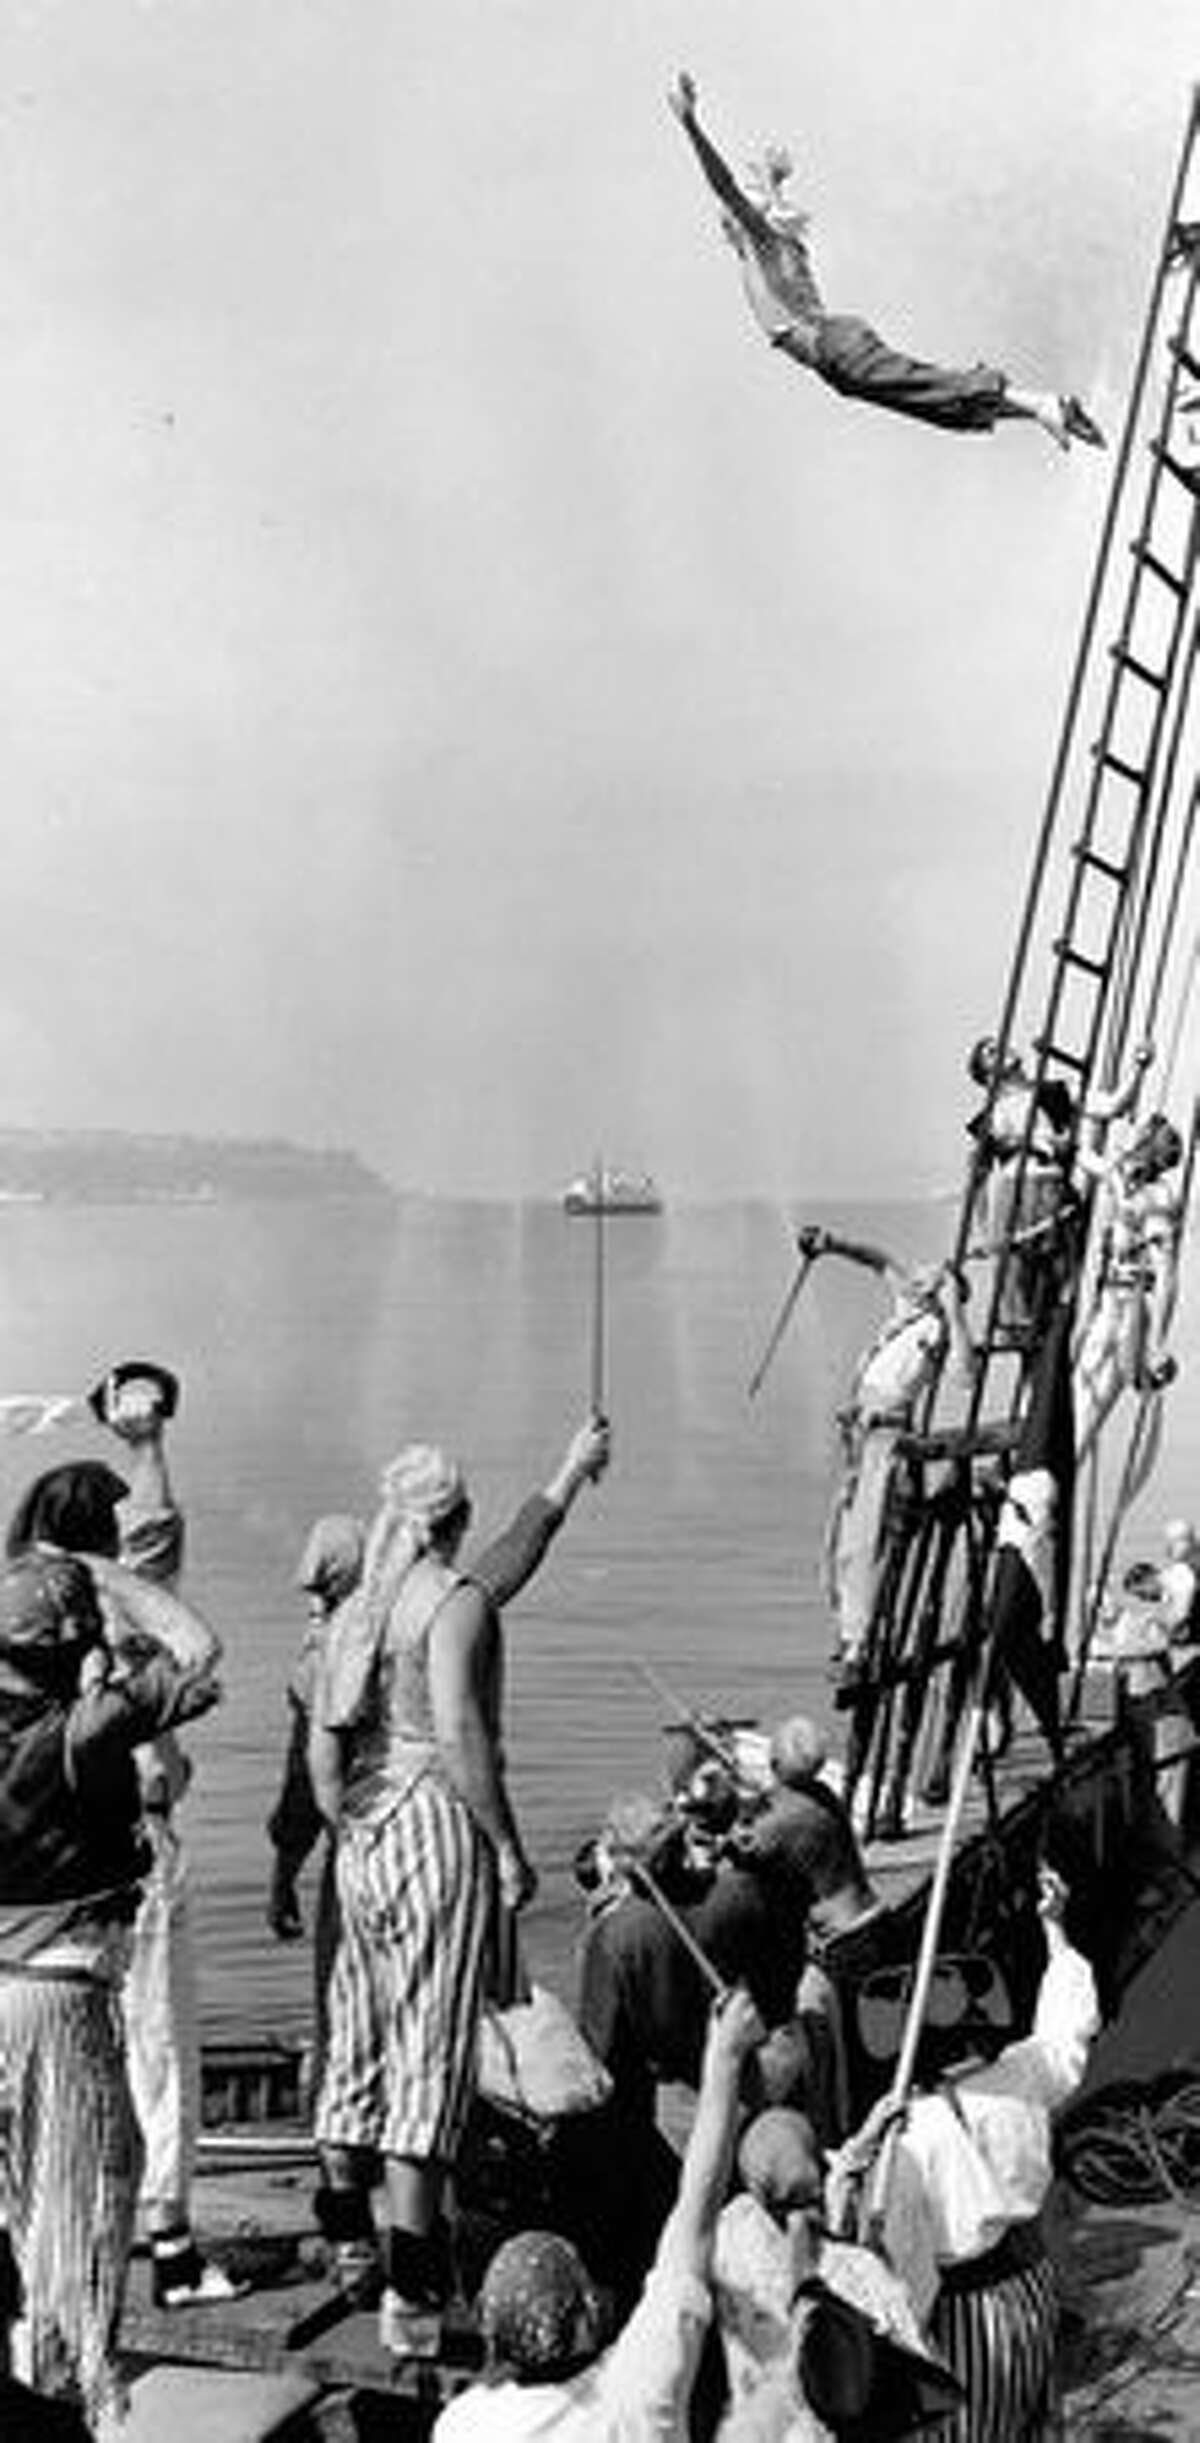 A Seafair pirate dives from the rigging of the three-masted schooner Wawona in Elliott Bay, July 1953.